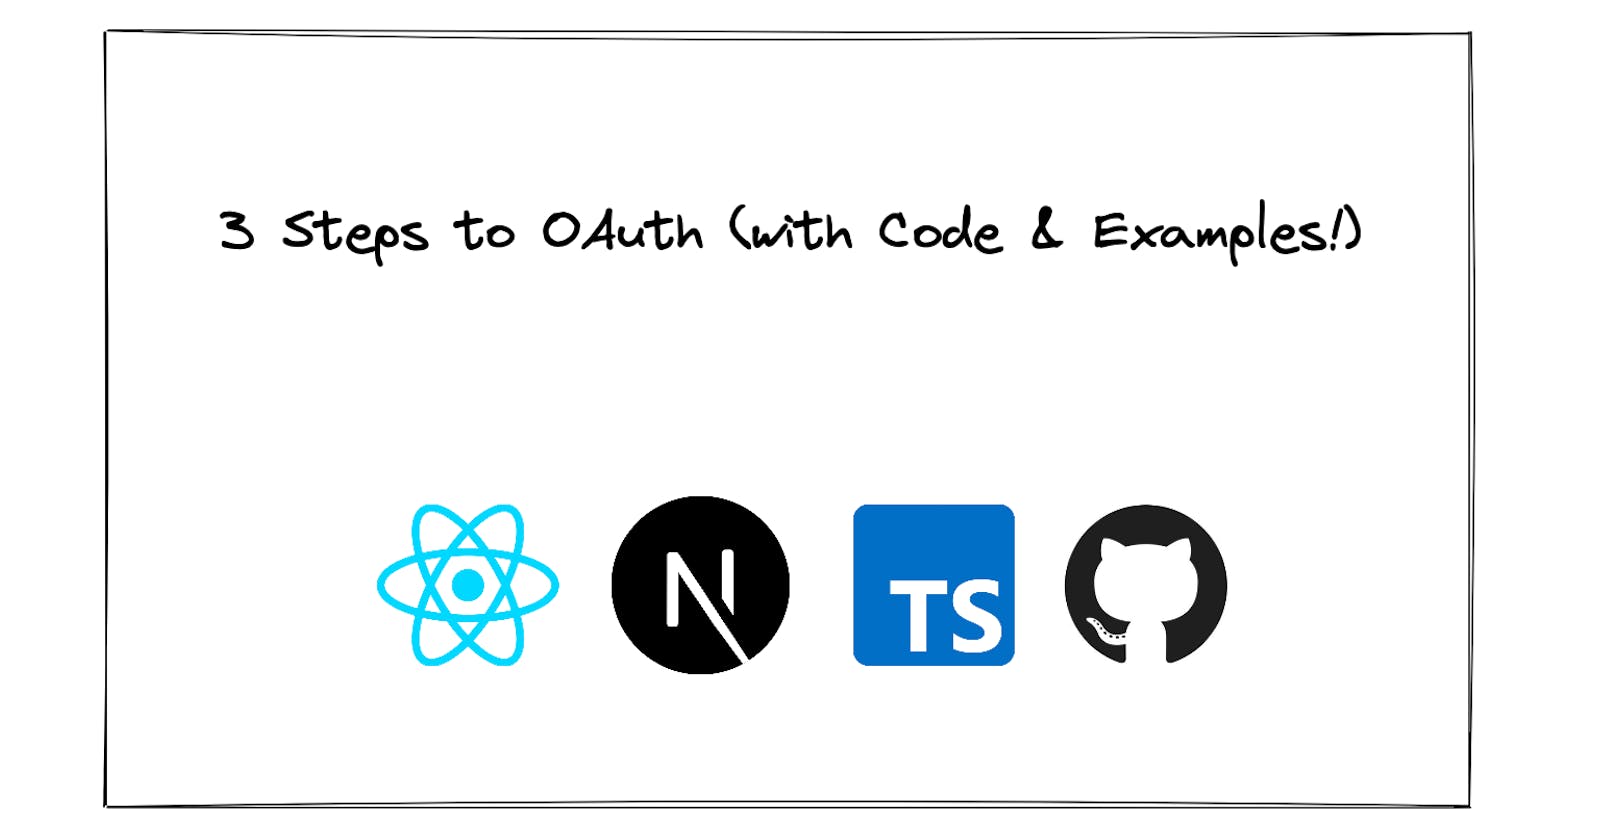 3 Steps to OAuth with Code & Examples!